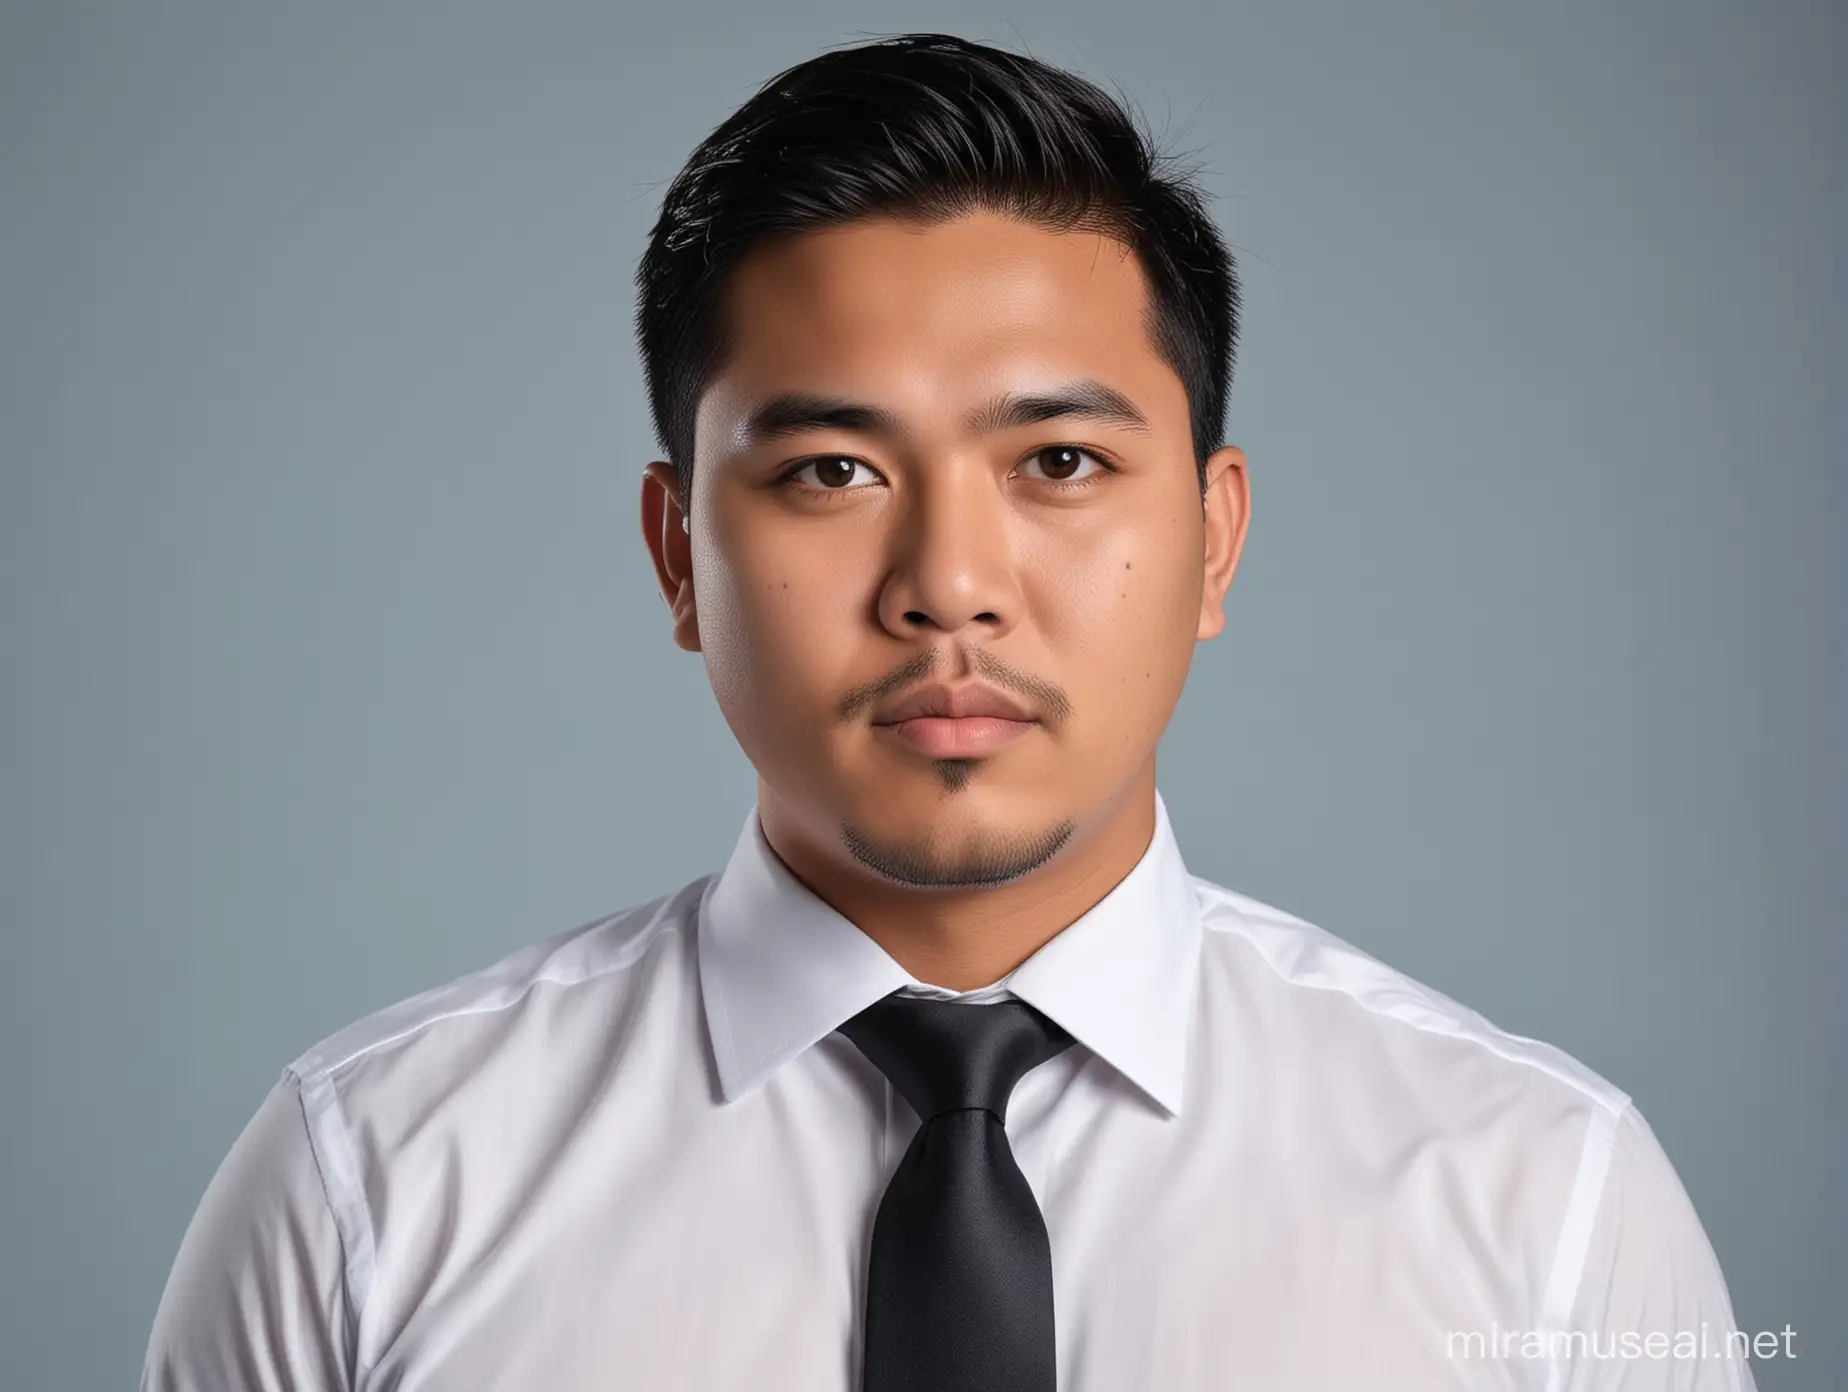 Indonesian Man in Formal Attire Against Sky Blue Background